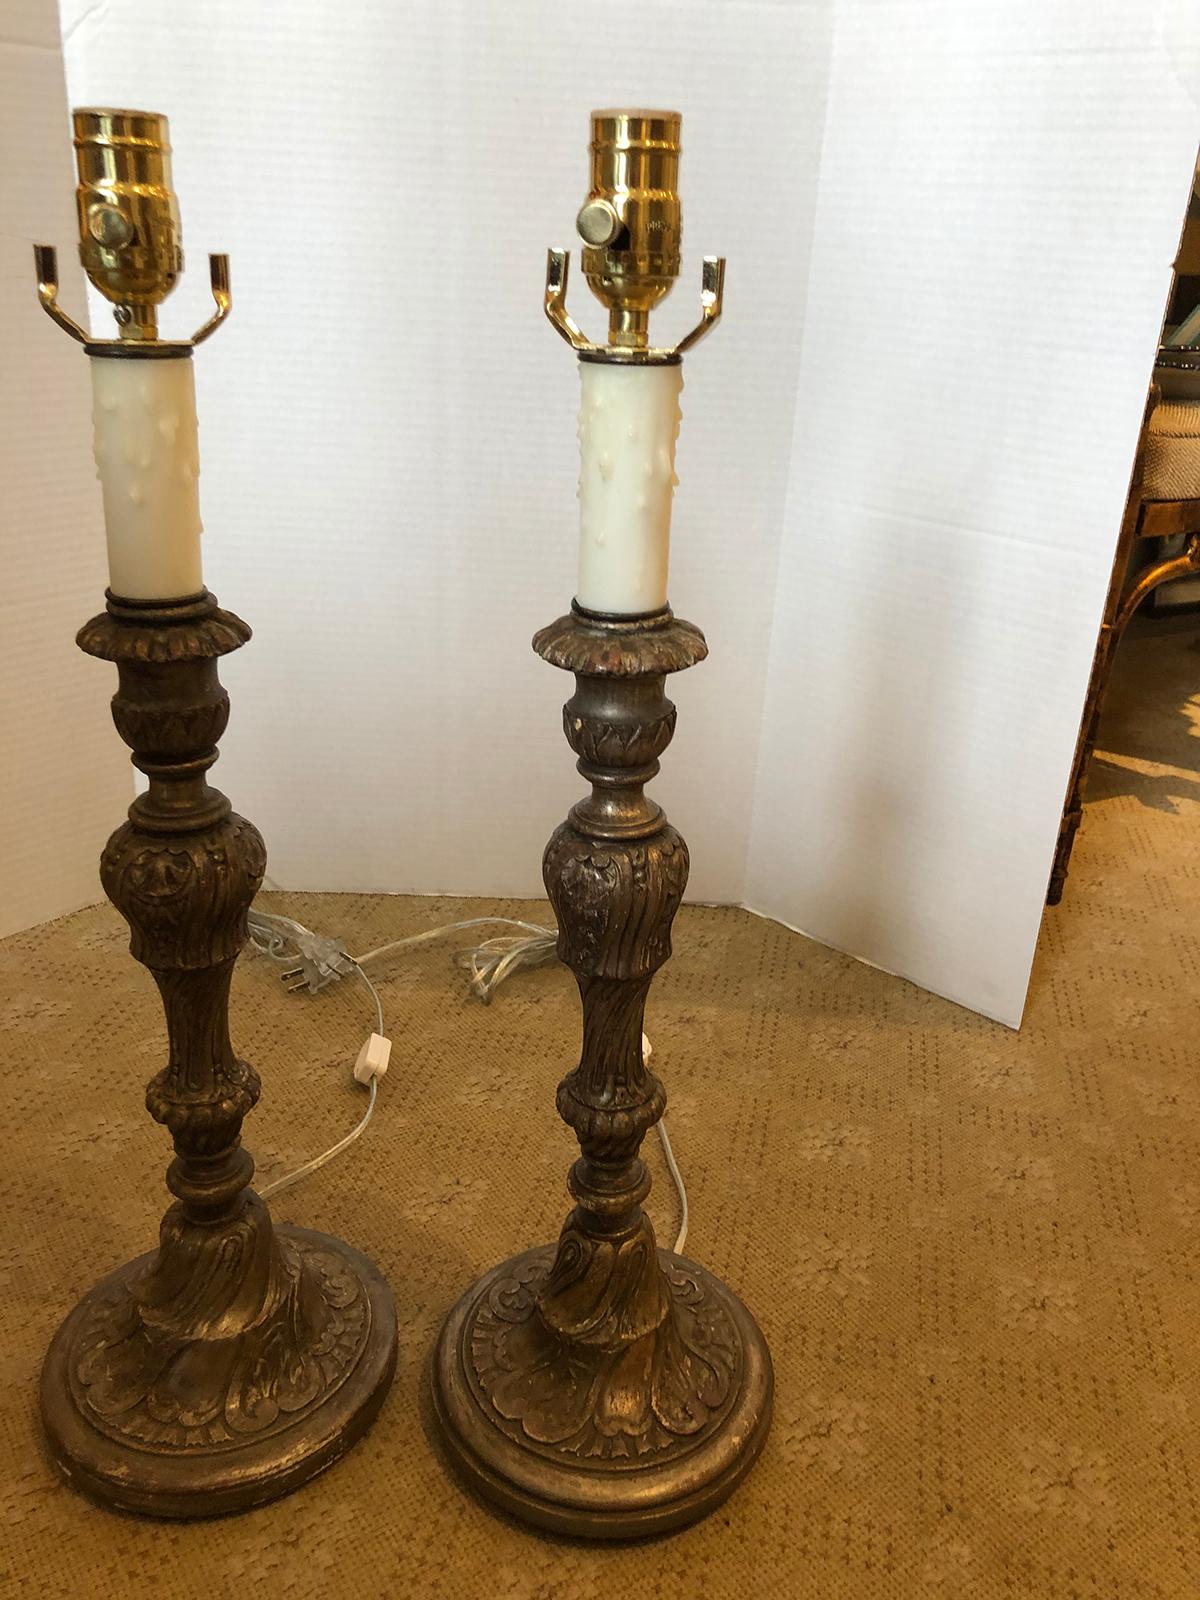 Pair of Early 20th Century Italian Silver Gilt Candlestick Lamps 9